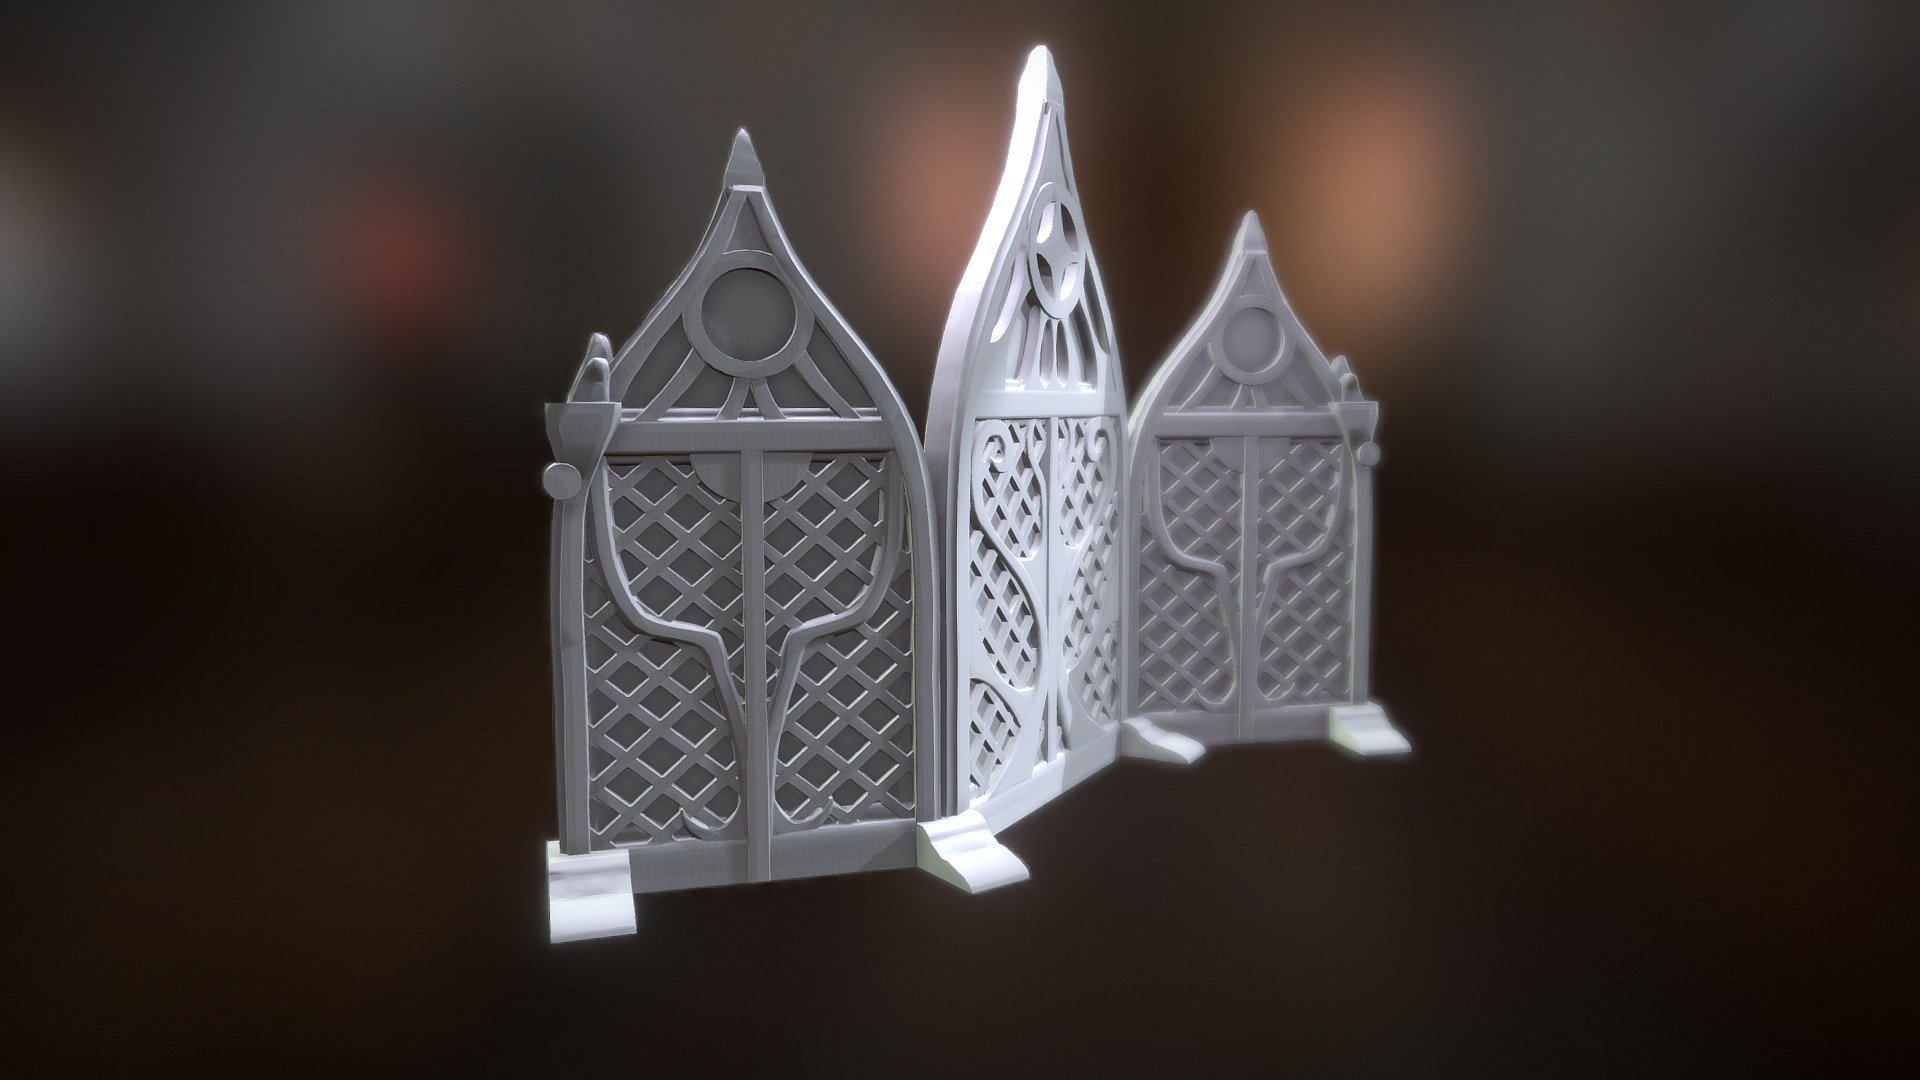 Miniature 3D printable folding privacy screen for D&amp;D and tabletop games!

File available for purchase in a 3D-Printable set from Infinite Dimensions Games:
https://www.infinitedimensions.ca/product/3d-printable-noblemans-furnishings/ - Miniature 3D Printable Privacy Screen - 3D model by Rita Puhakka (@RitaPuhakka) 3d model